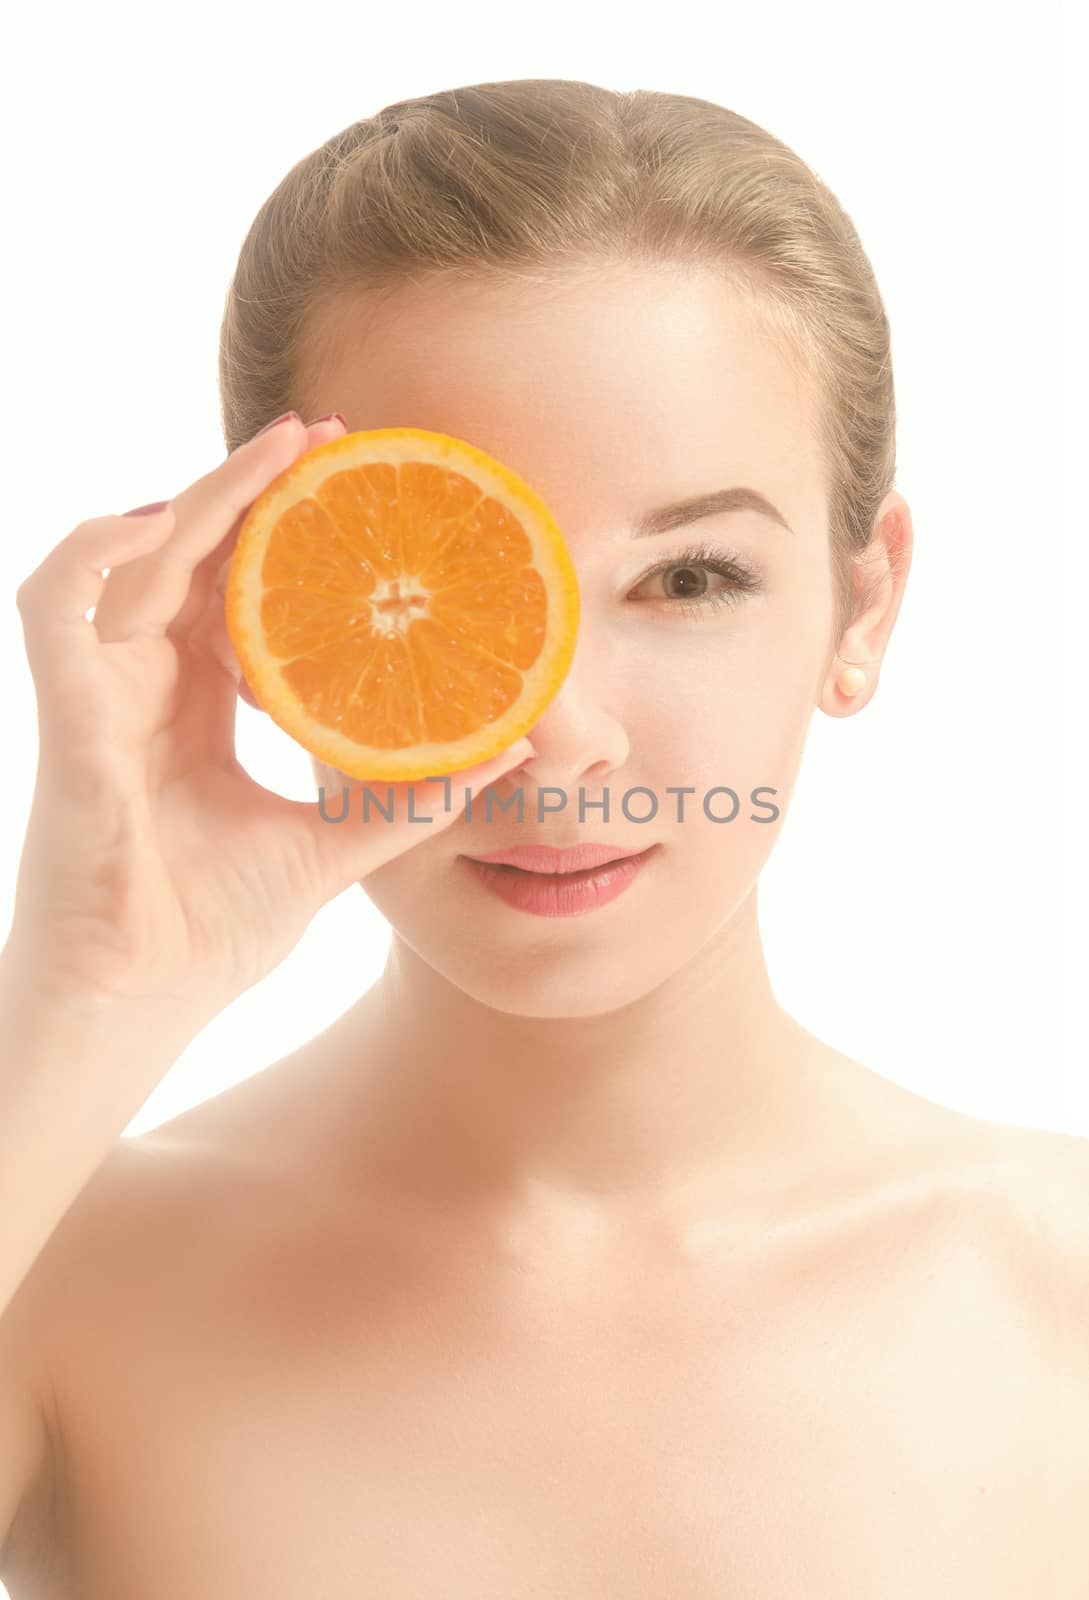 Attractive young woman with a slice of orange in front of her eyes, which stands on white background and smiling